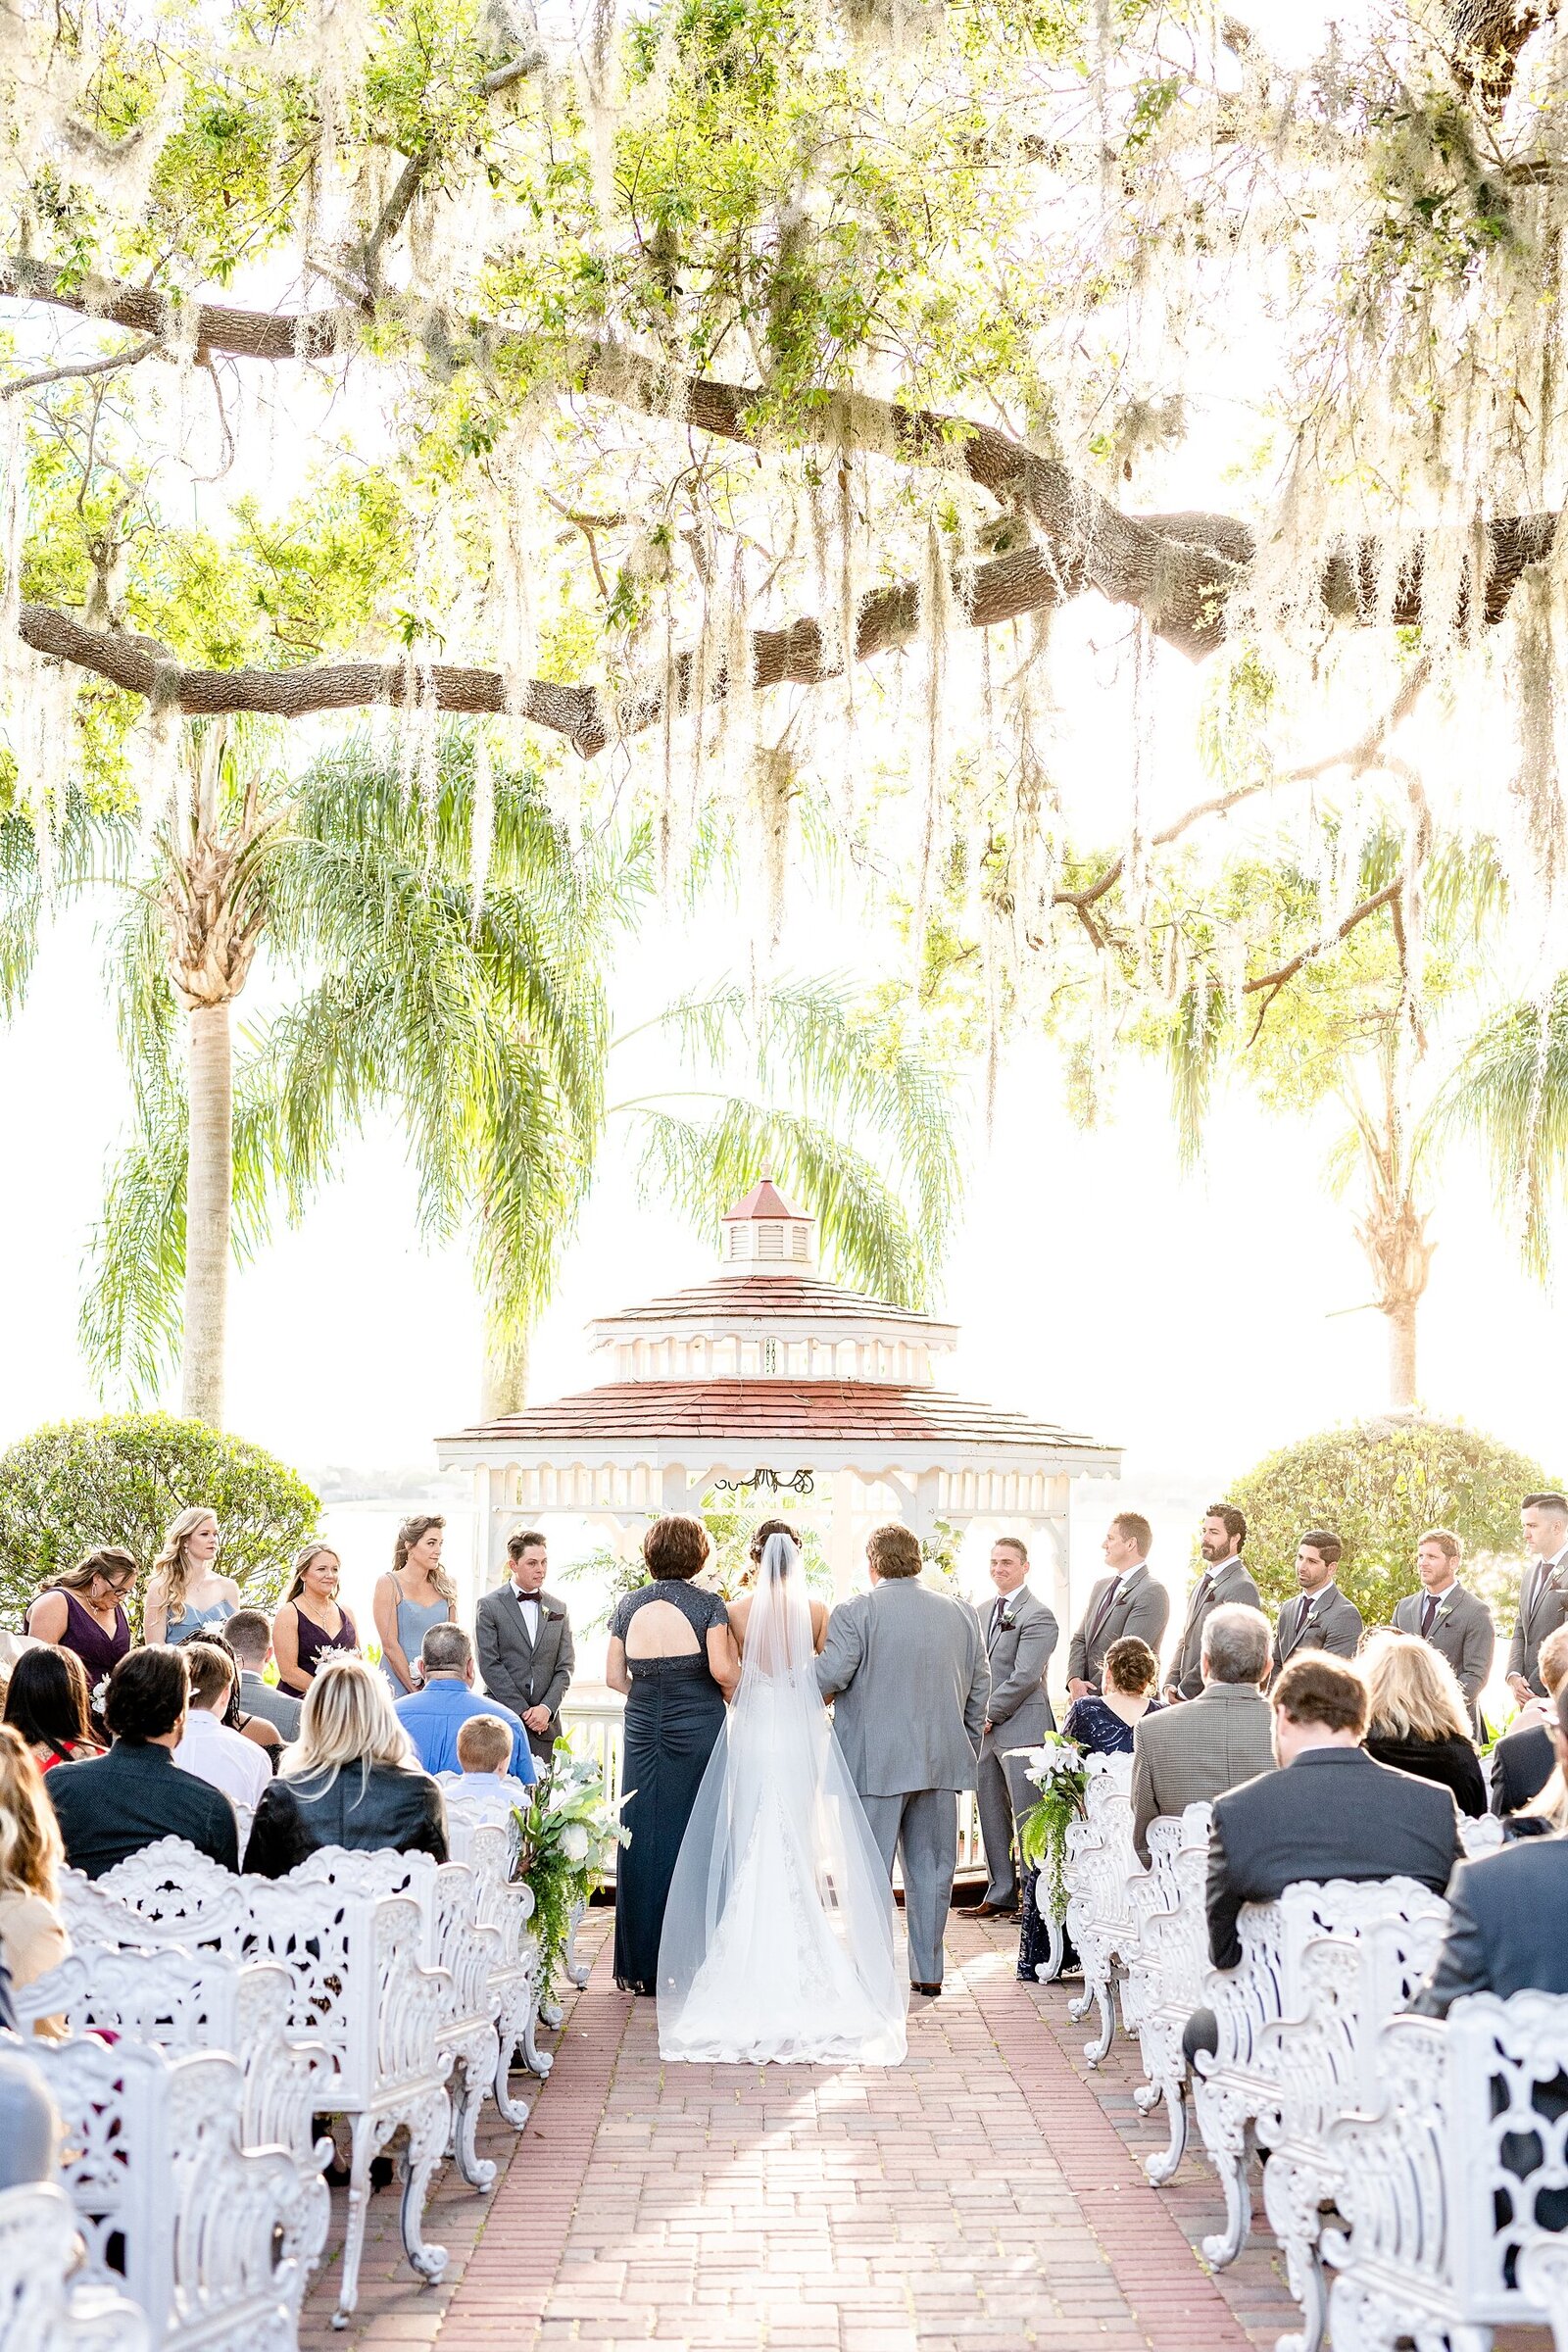 Wedding Venues on the lake | Town Manor | Chynna Pacheco Photography